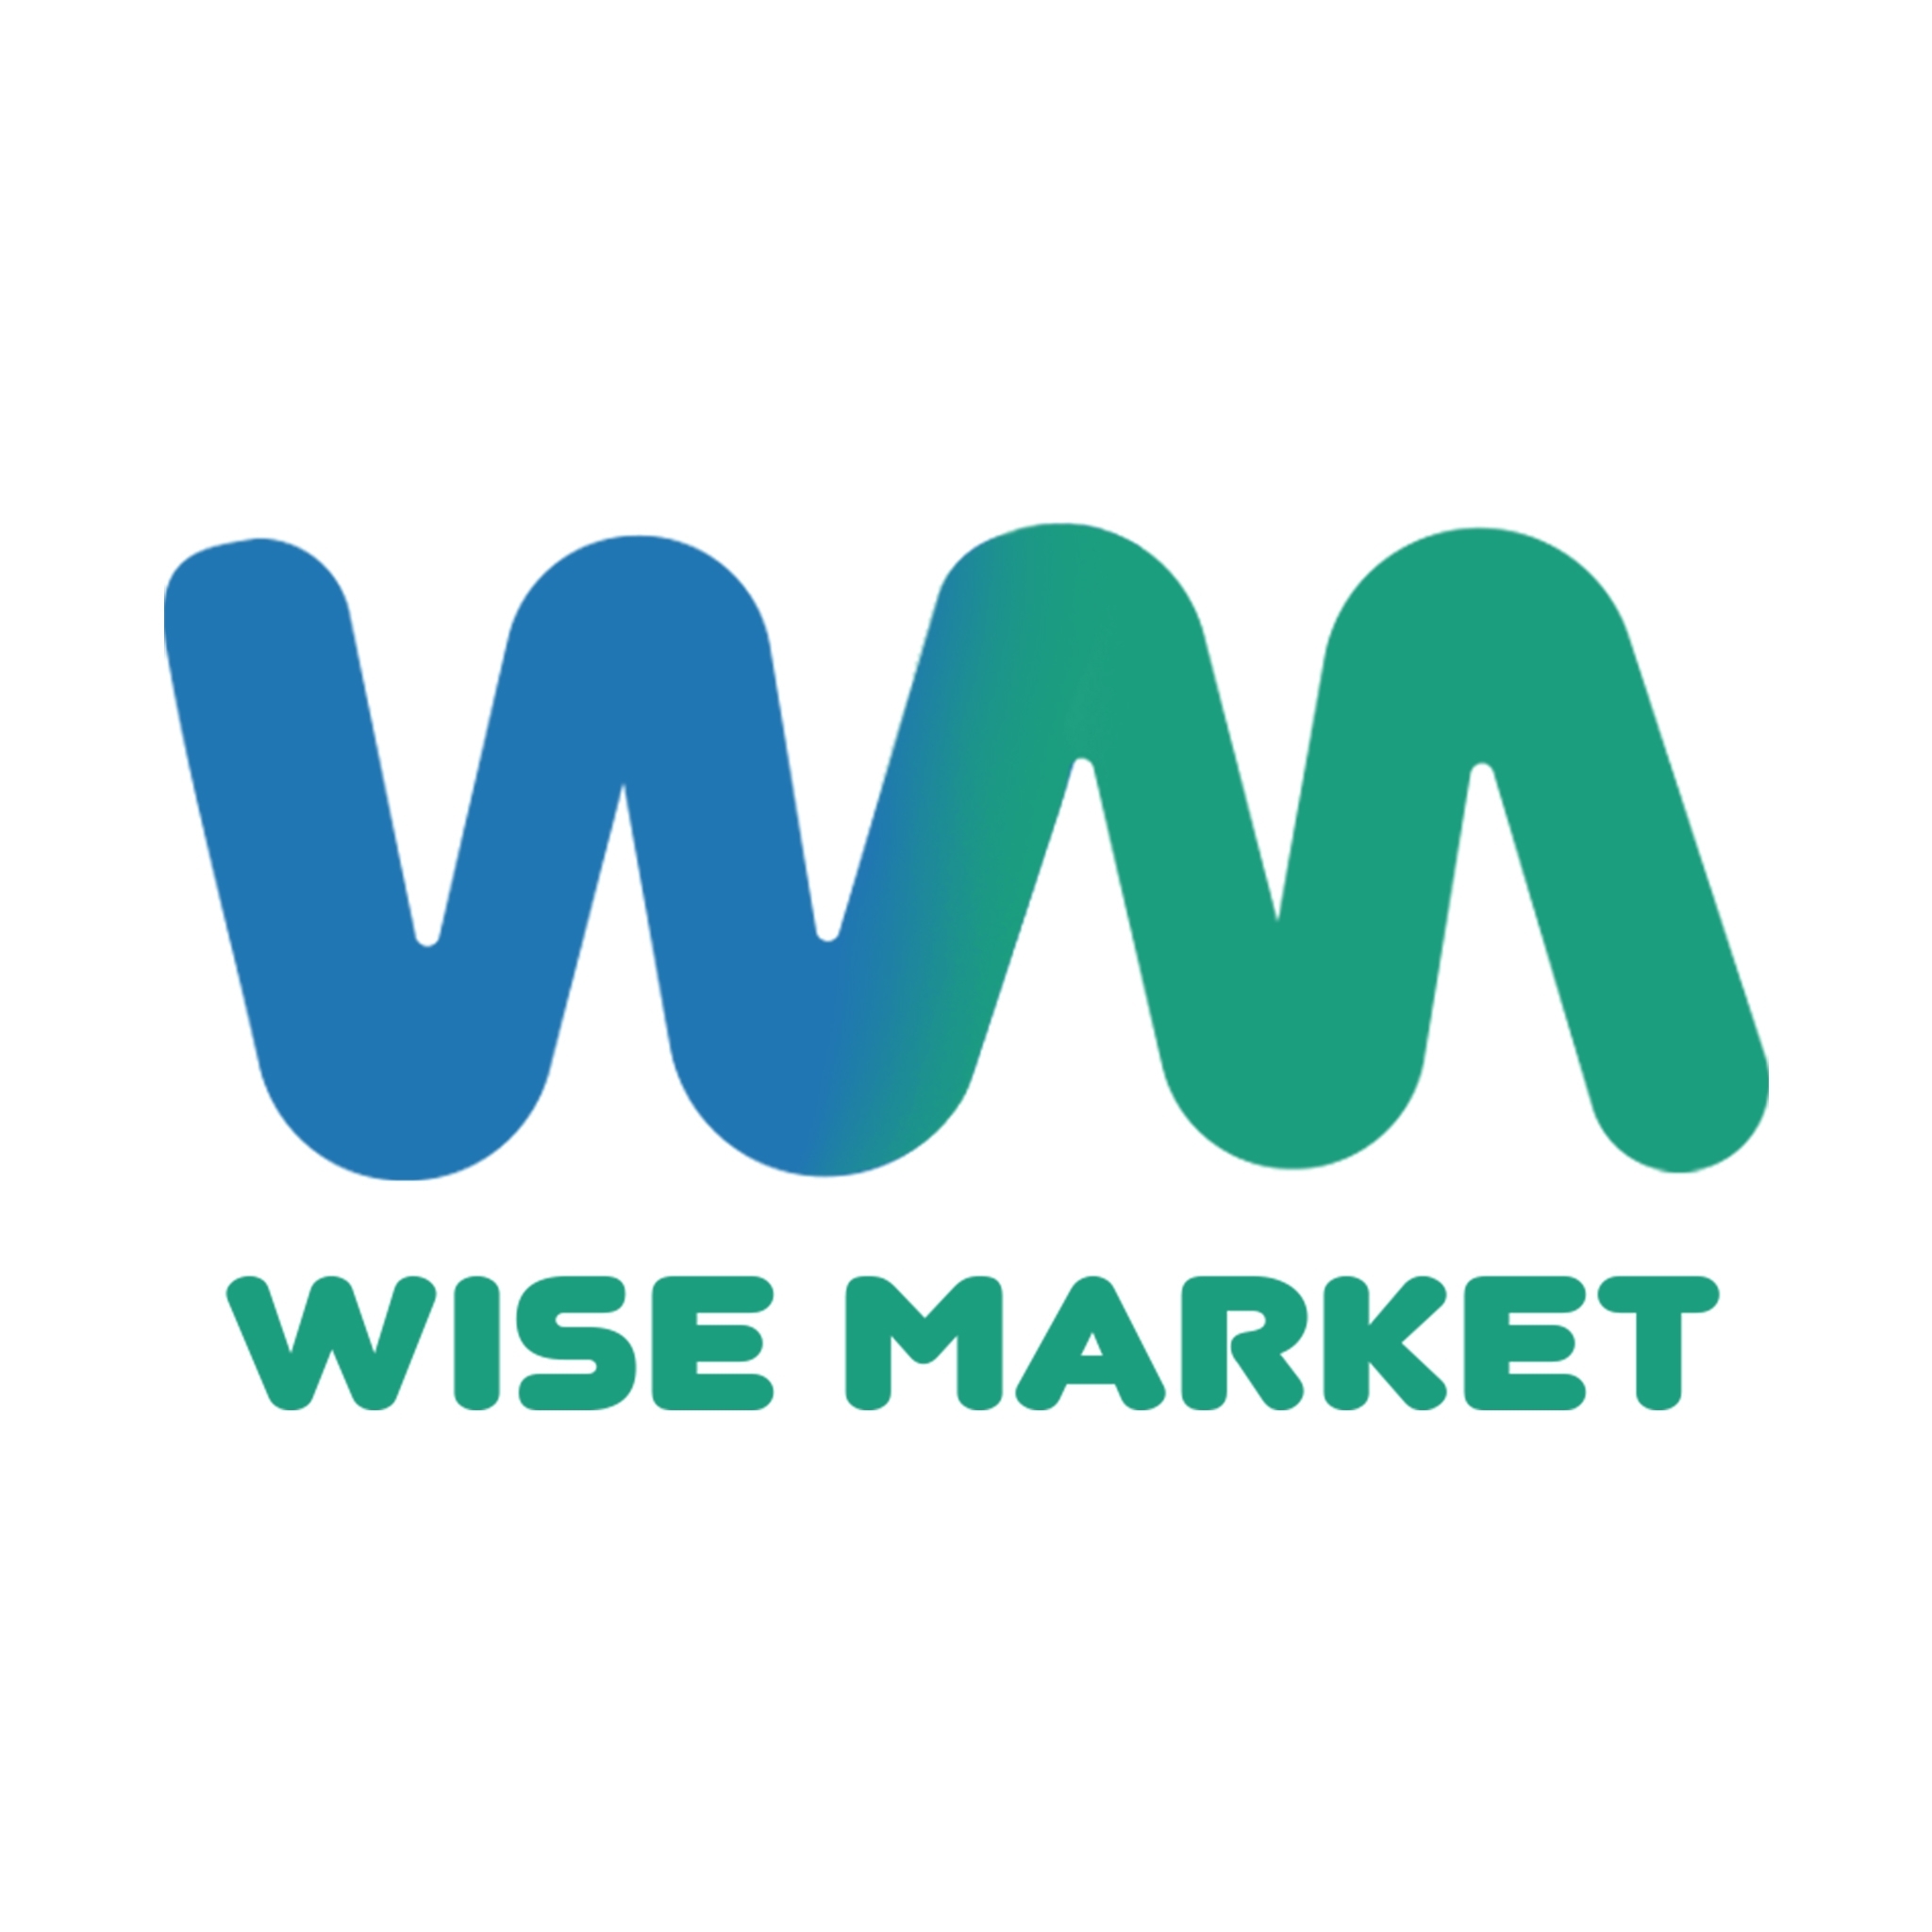 Wise Market is an online marketplace for the